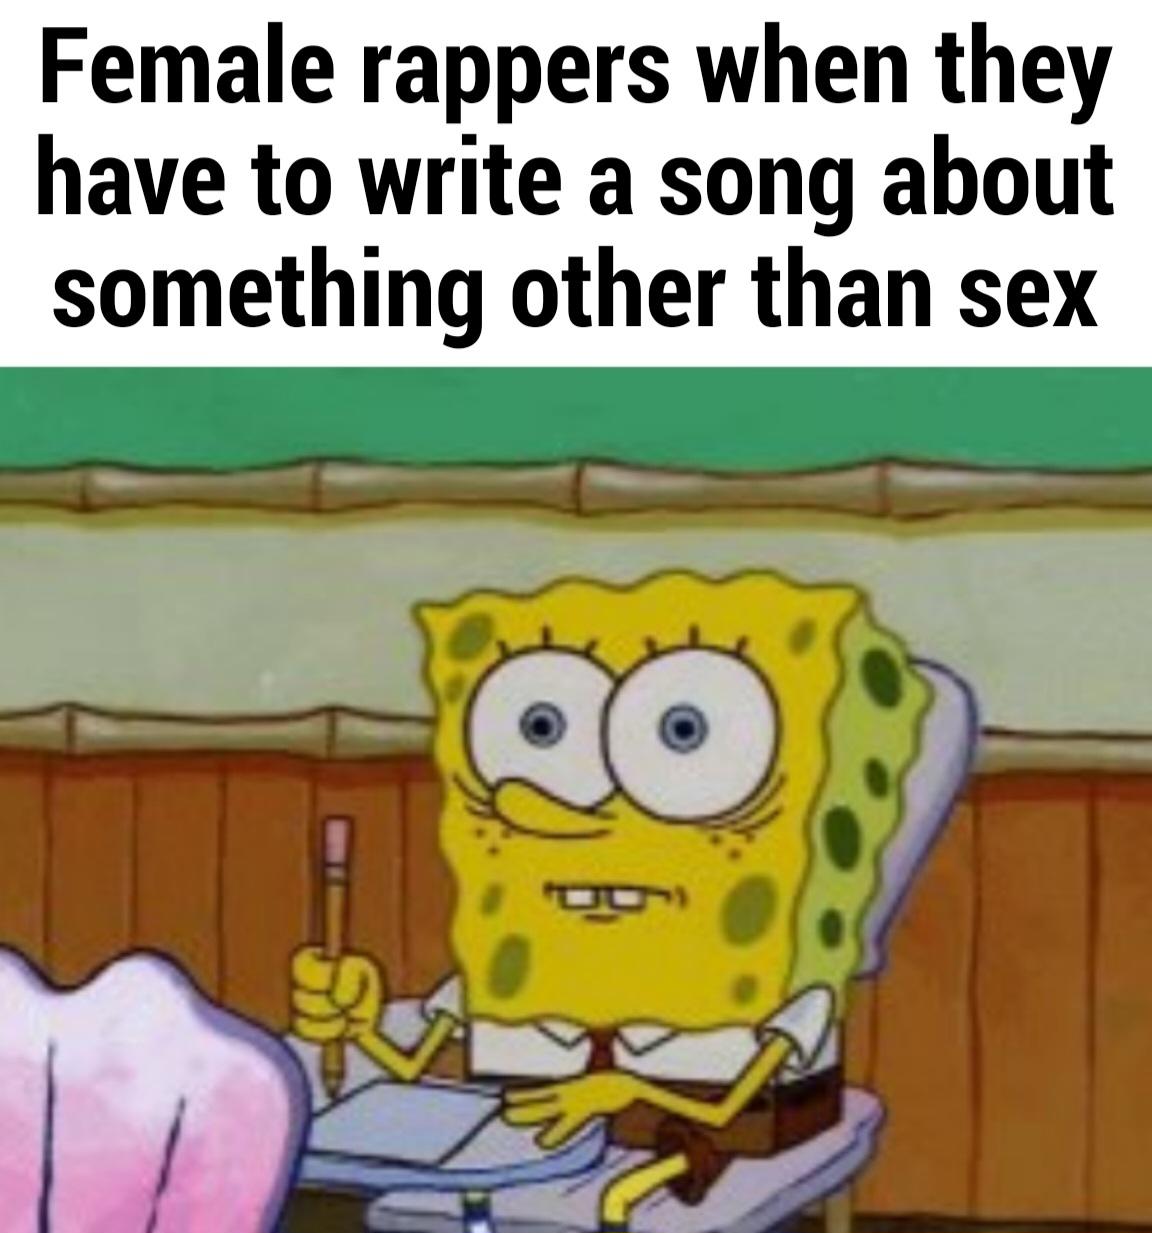 funny memes and pics - hana hou restaurant - Female rappers when they have to write a song about something other than sex Qo